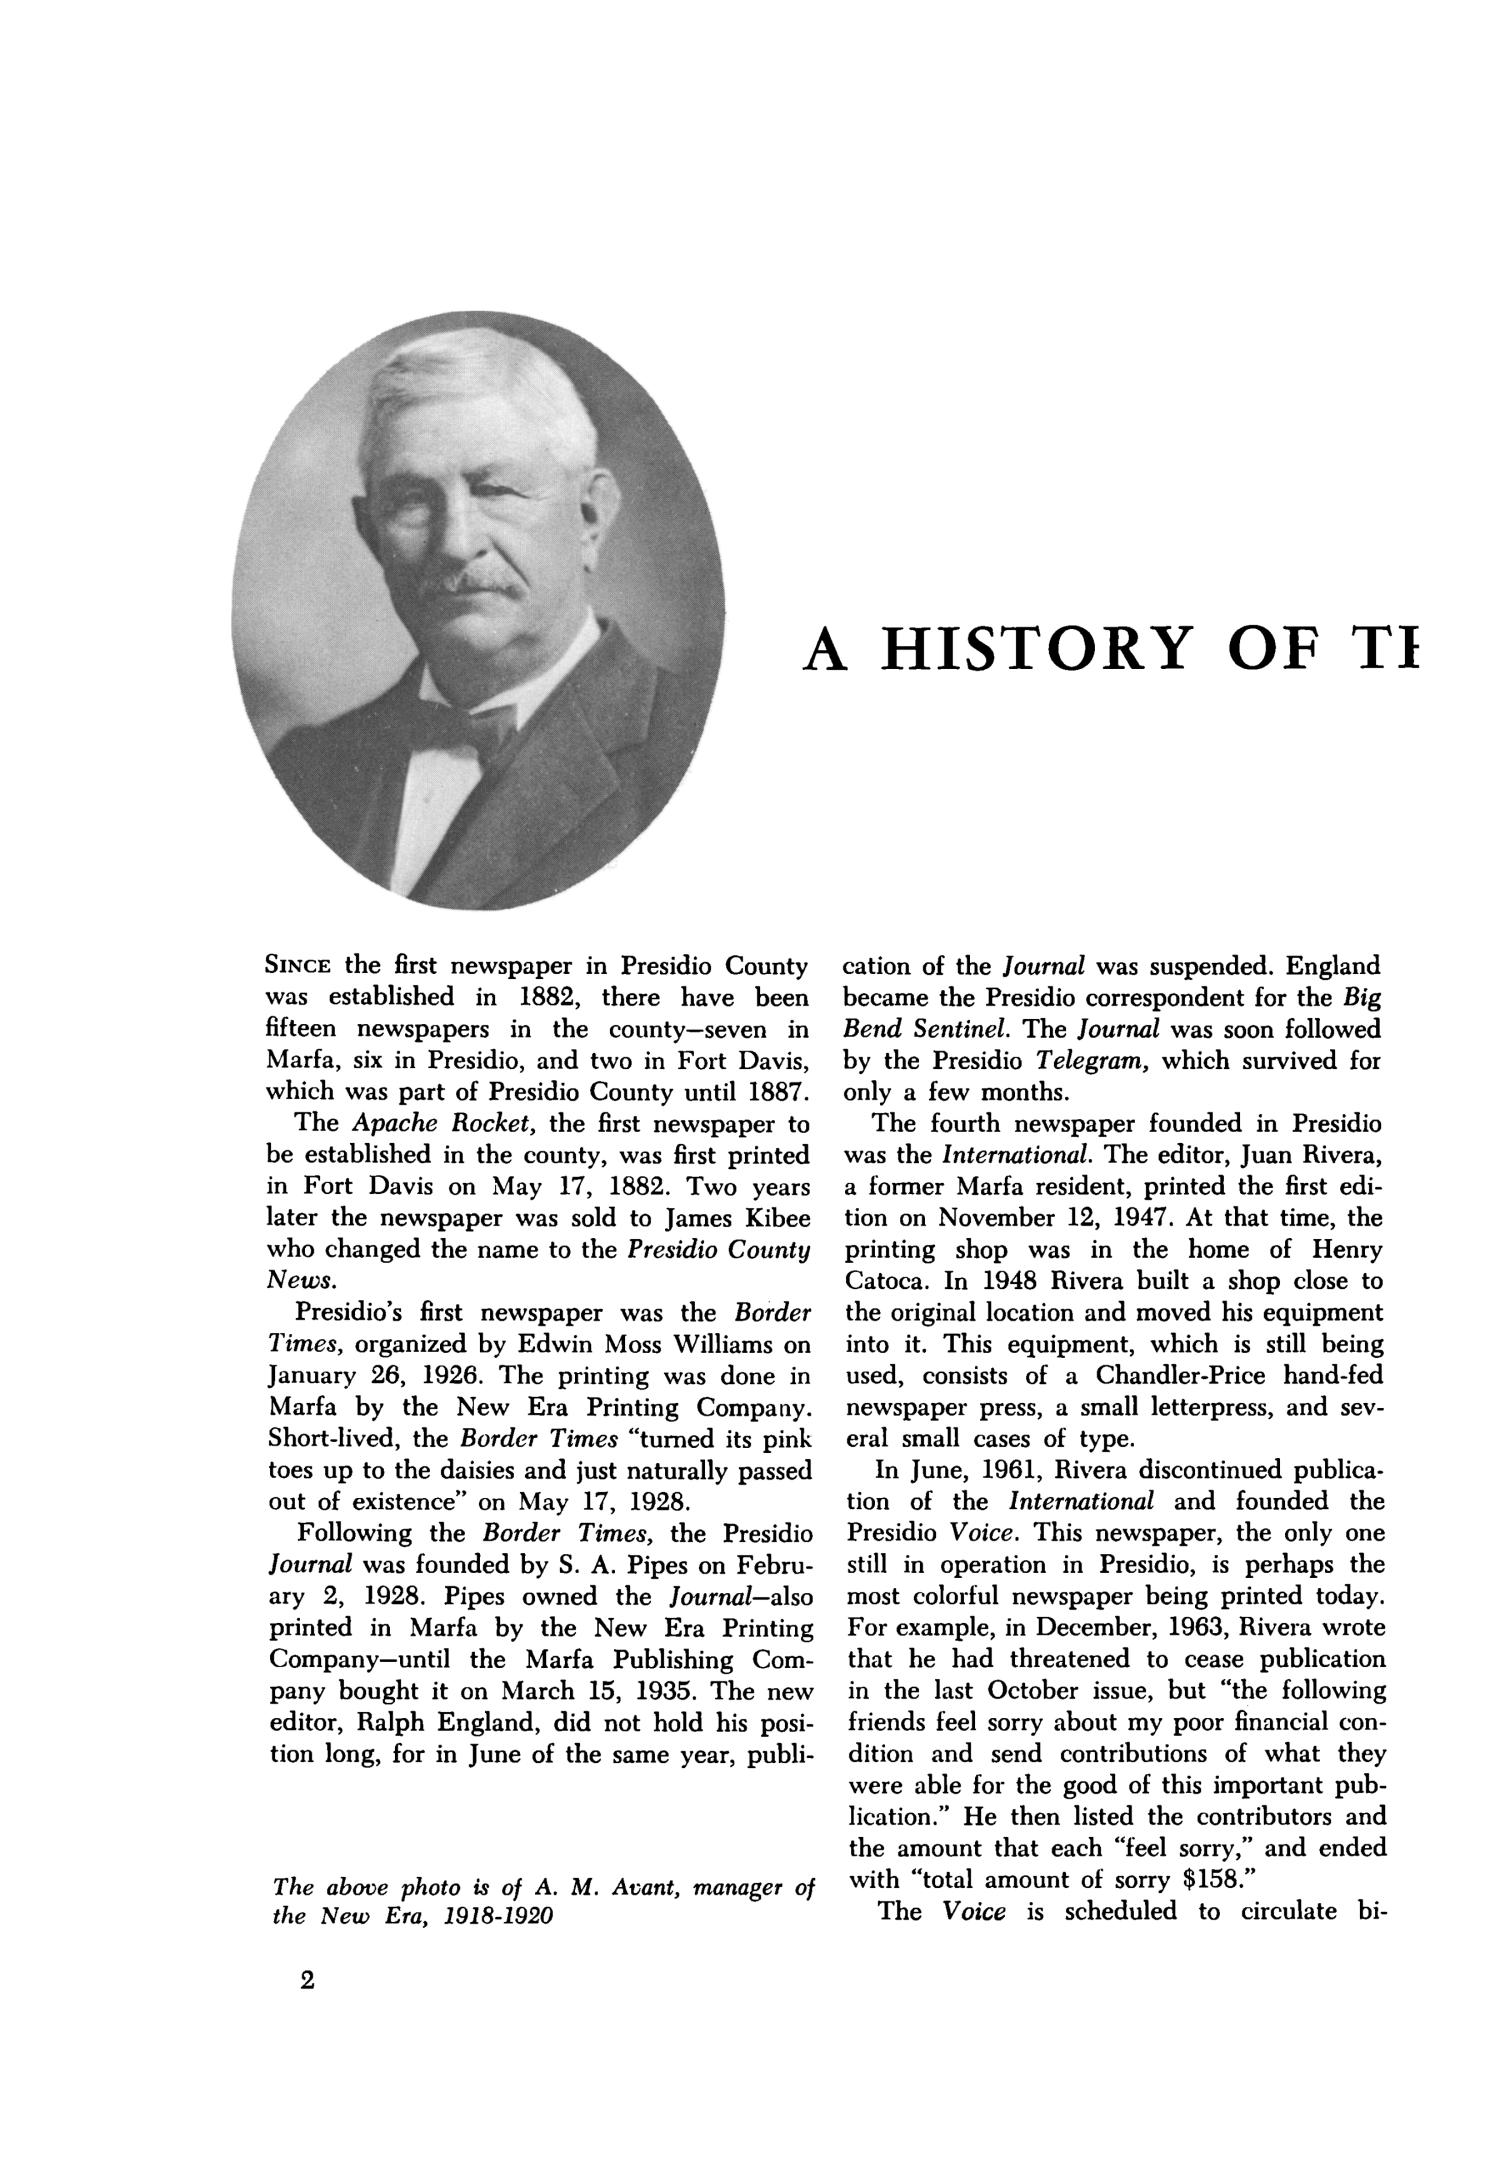 The Texas Historian, Volume 31, Number 3, January 1971
                                                
                                                    2
                                                